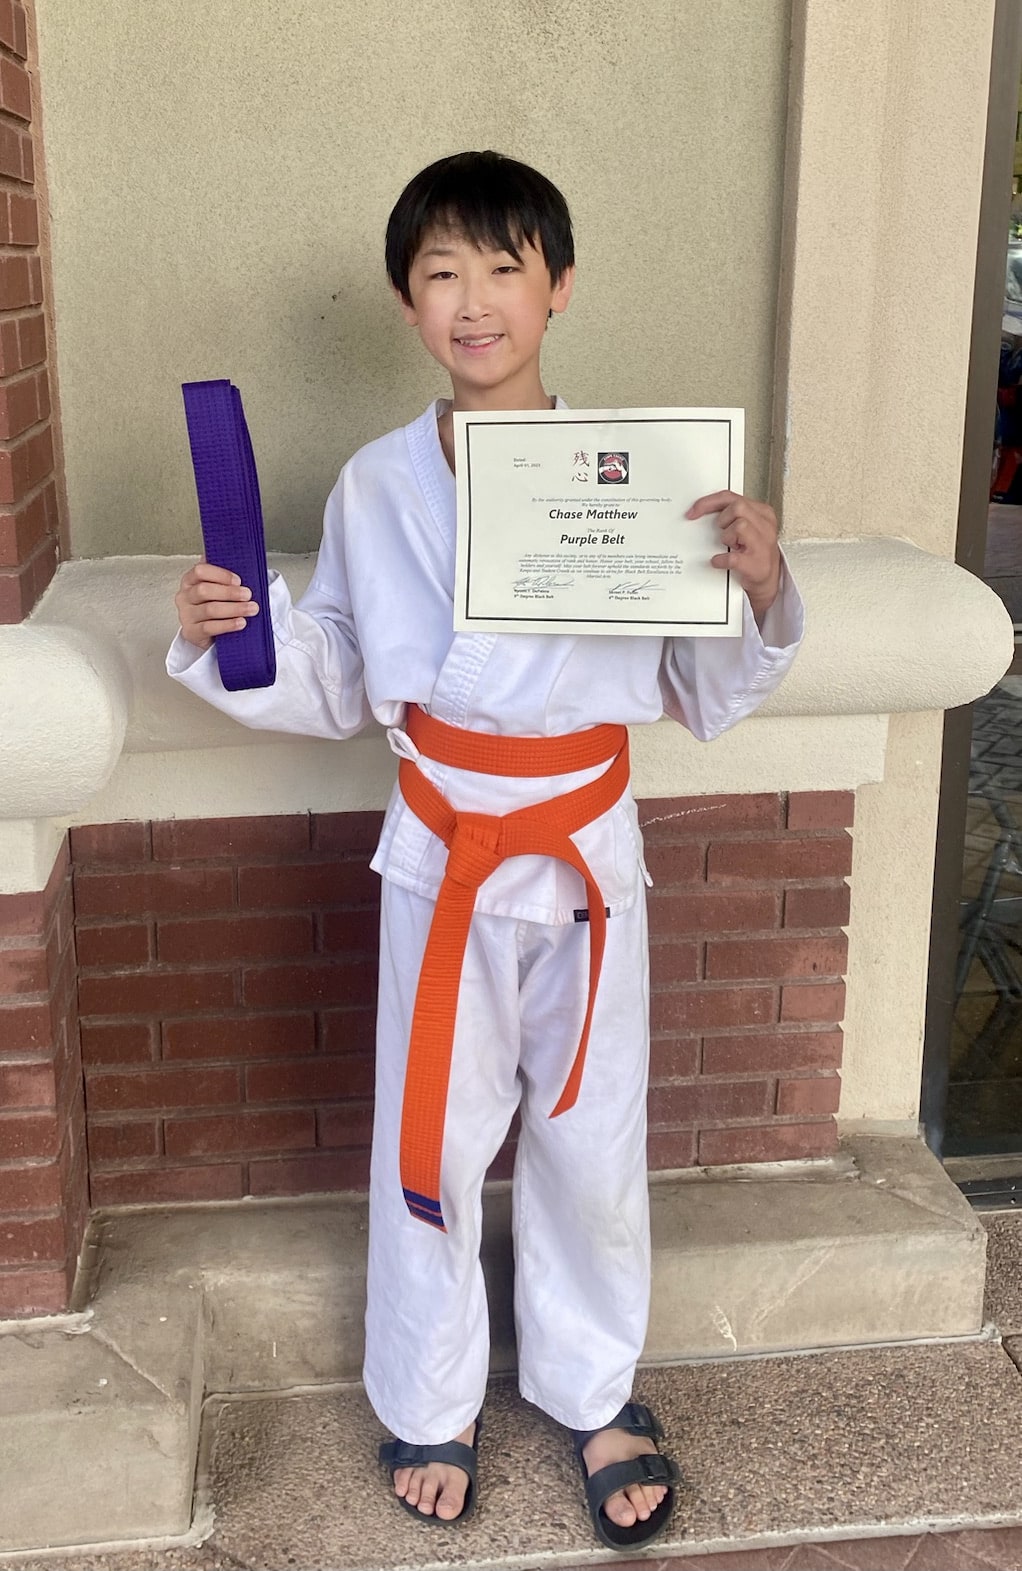 Chase obtains his purple belt!  Go Chase!